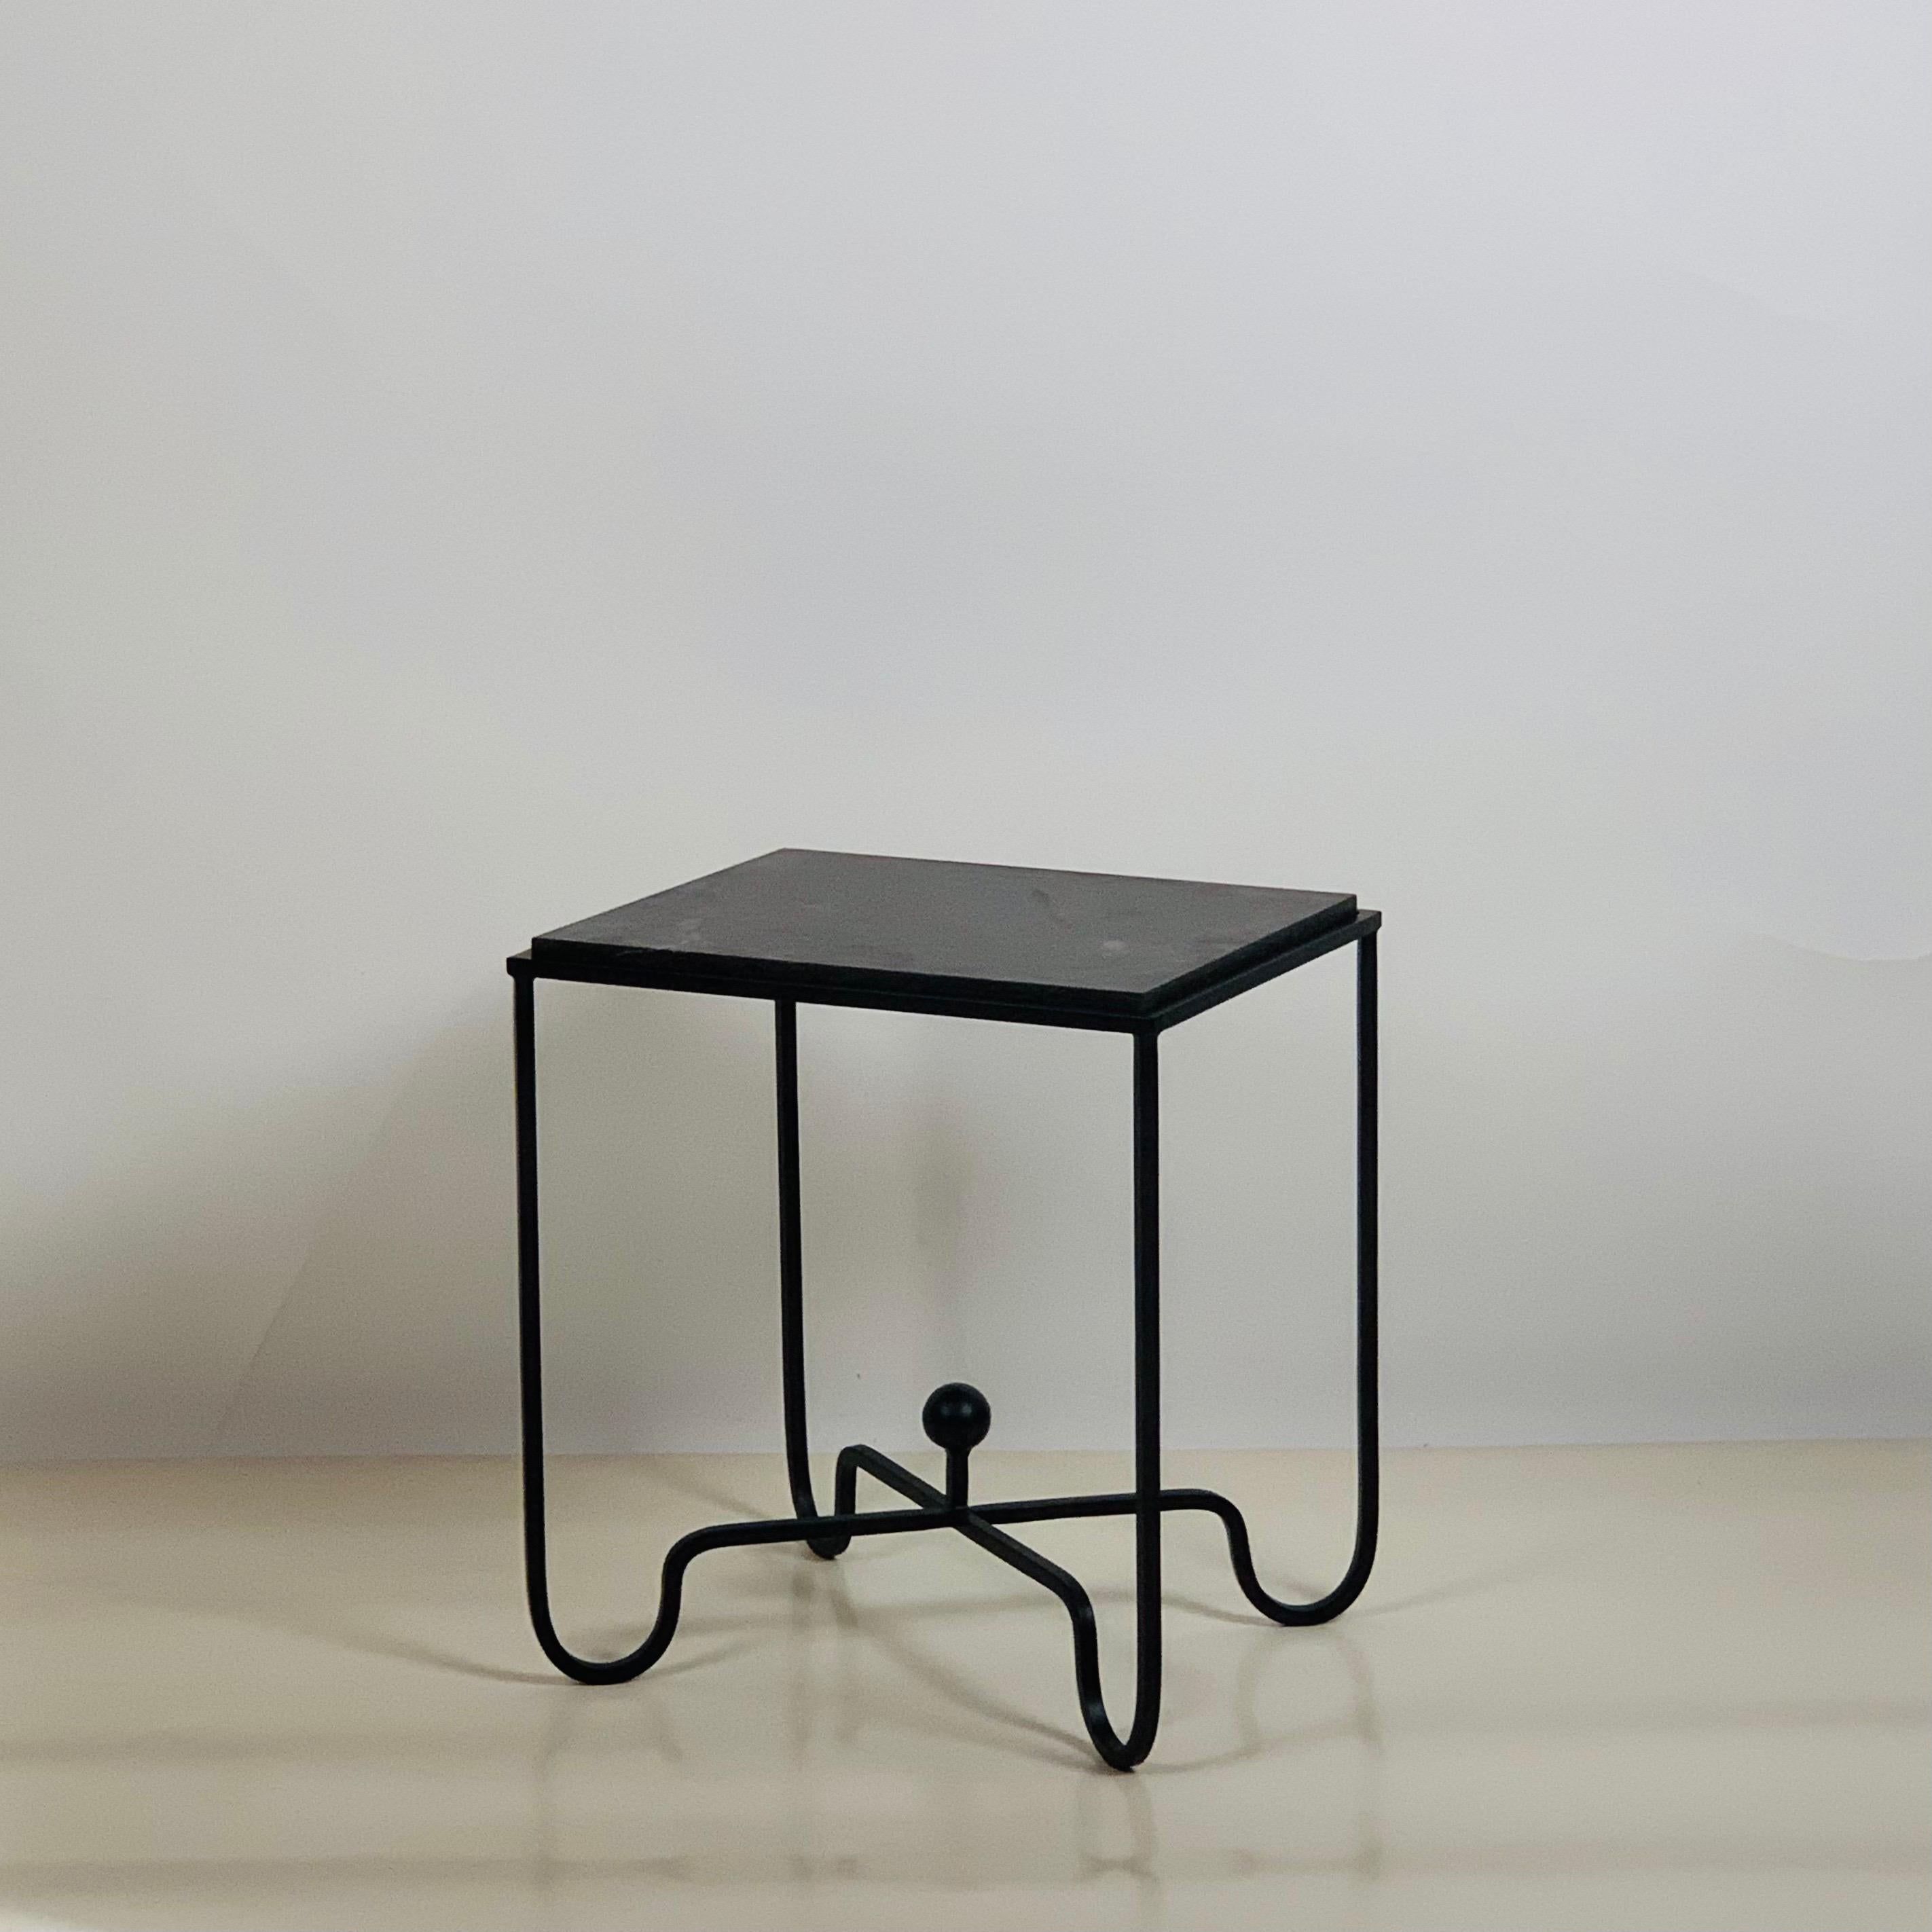 European Pair of Chic 'Entretoise' Black Limestone Night Stands by Design Frères For Sale